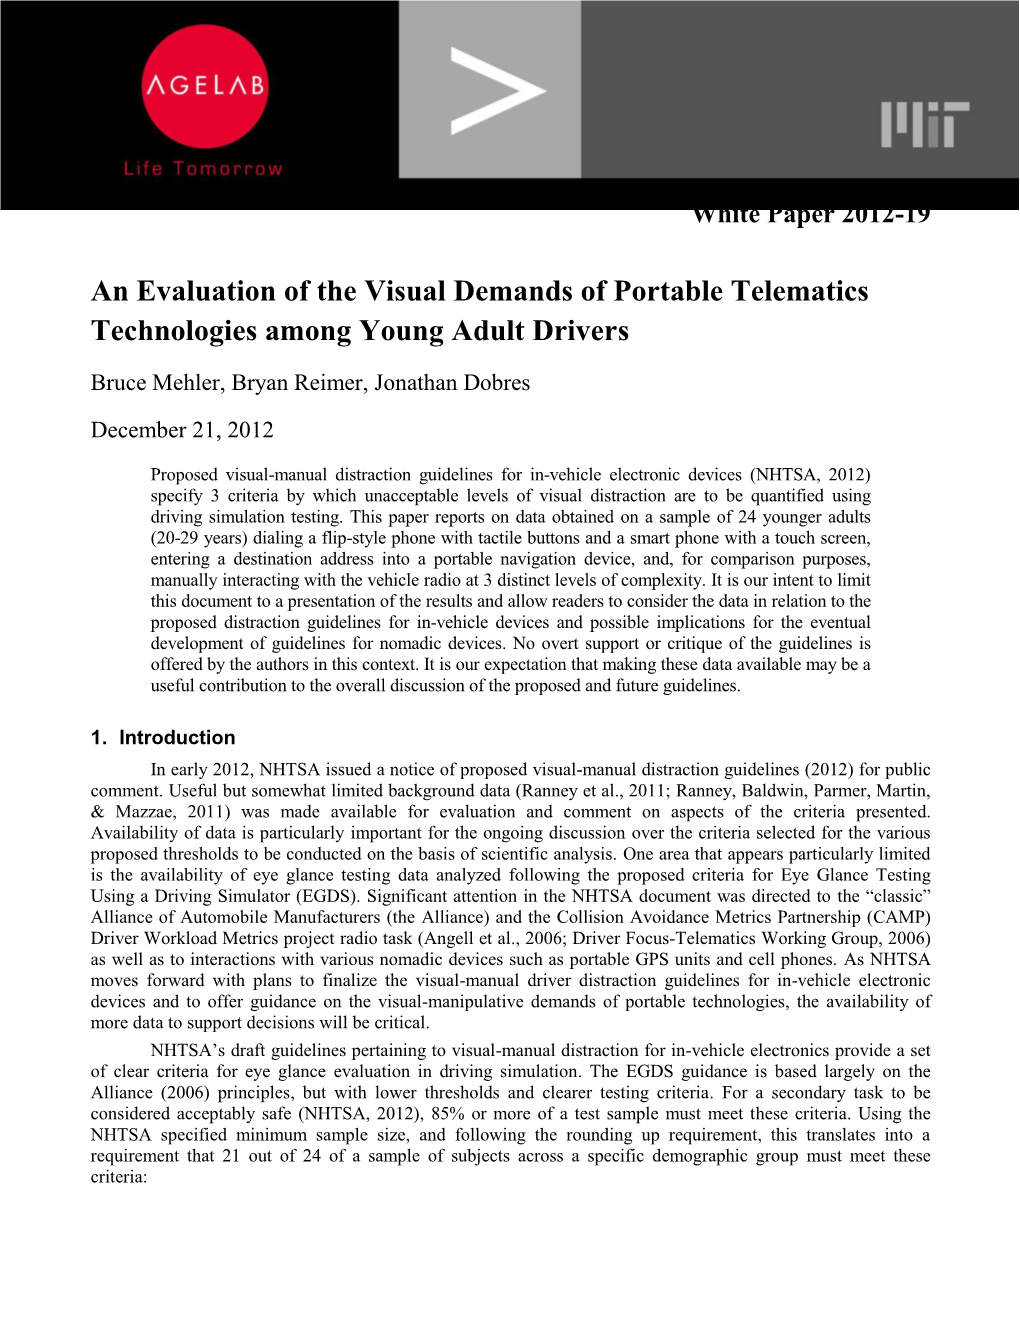 An Evaluation of the Visual Demands of Portable Telematics Technologies Among Young Adult Drivers